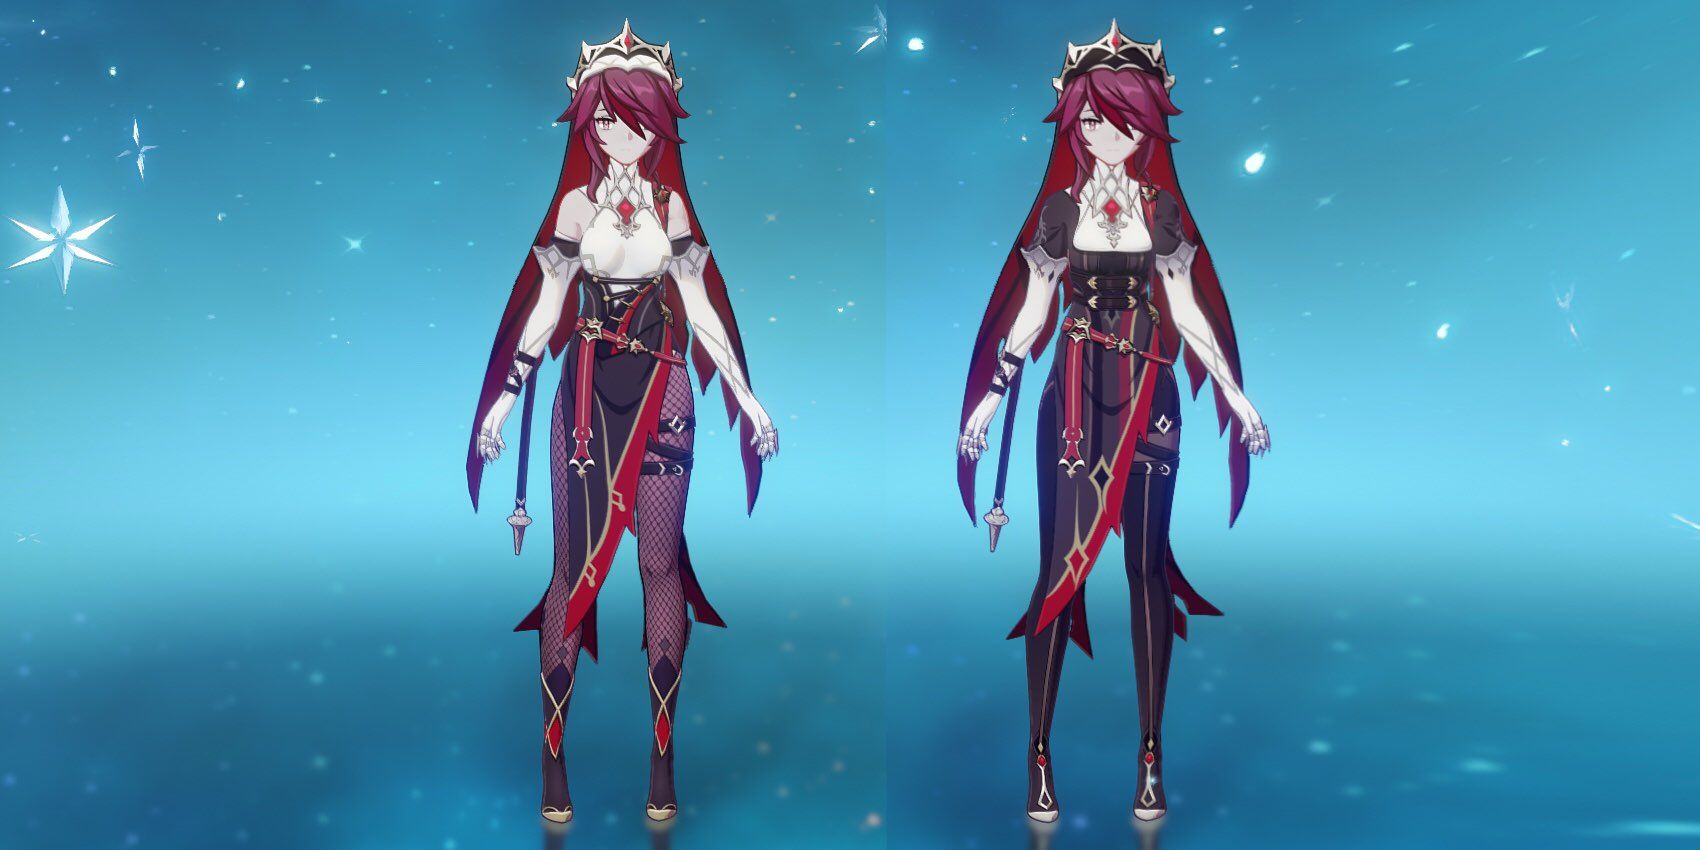 Genshin Impact Thorny Benevolence Rosaria Alternate Outfit – To the Church’s Free Spirit